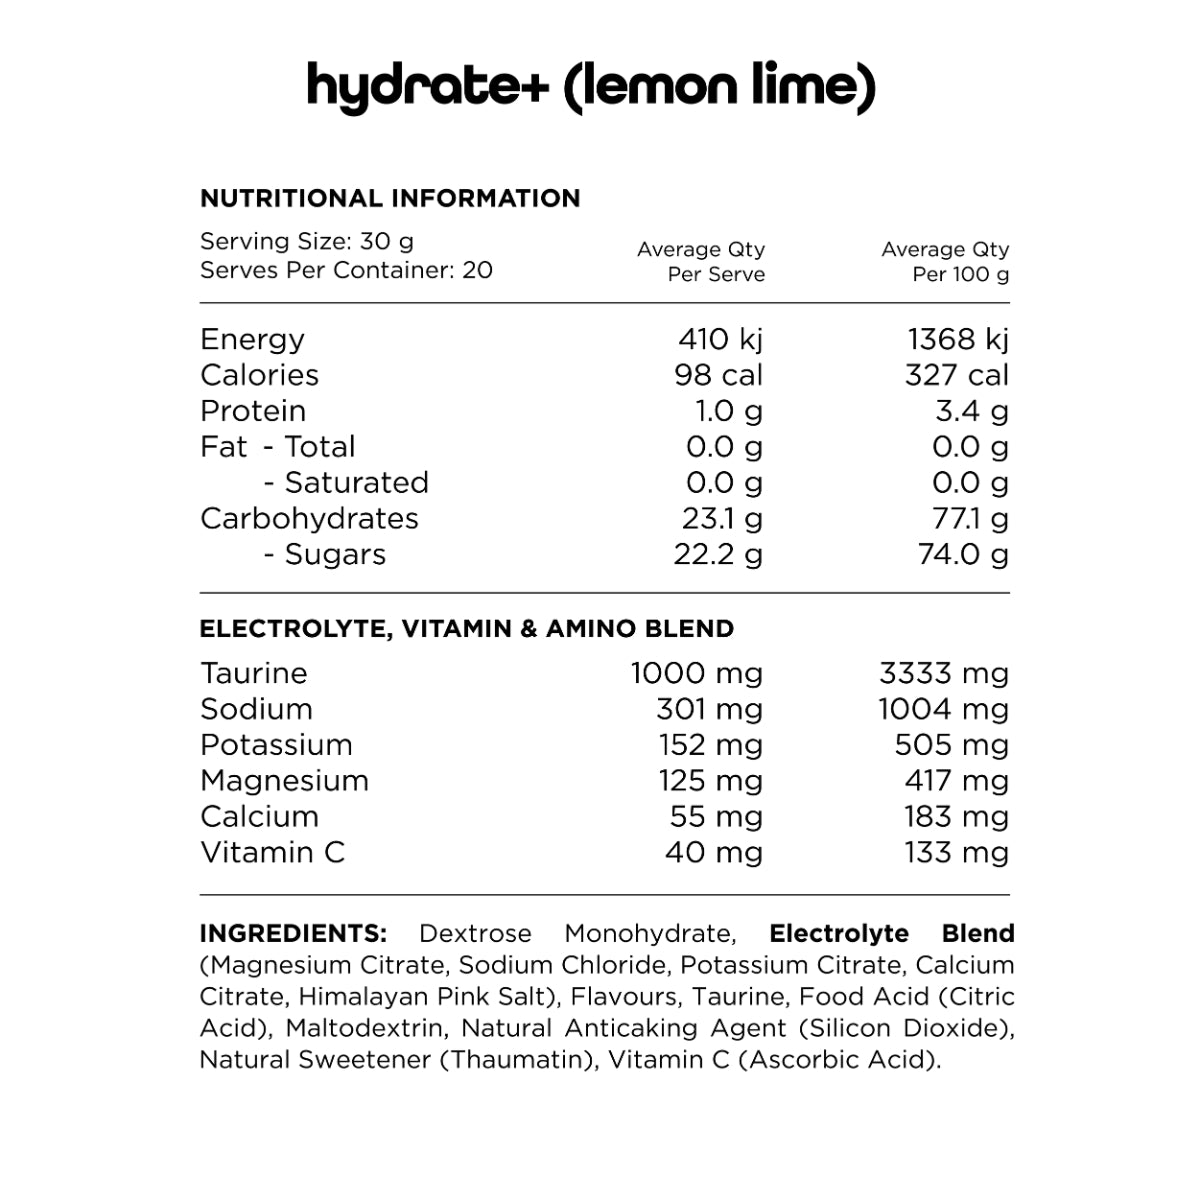 Switch Nutrition Hydrate +